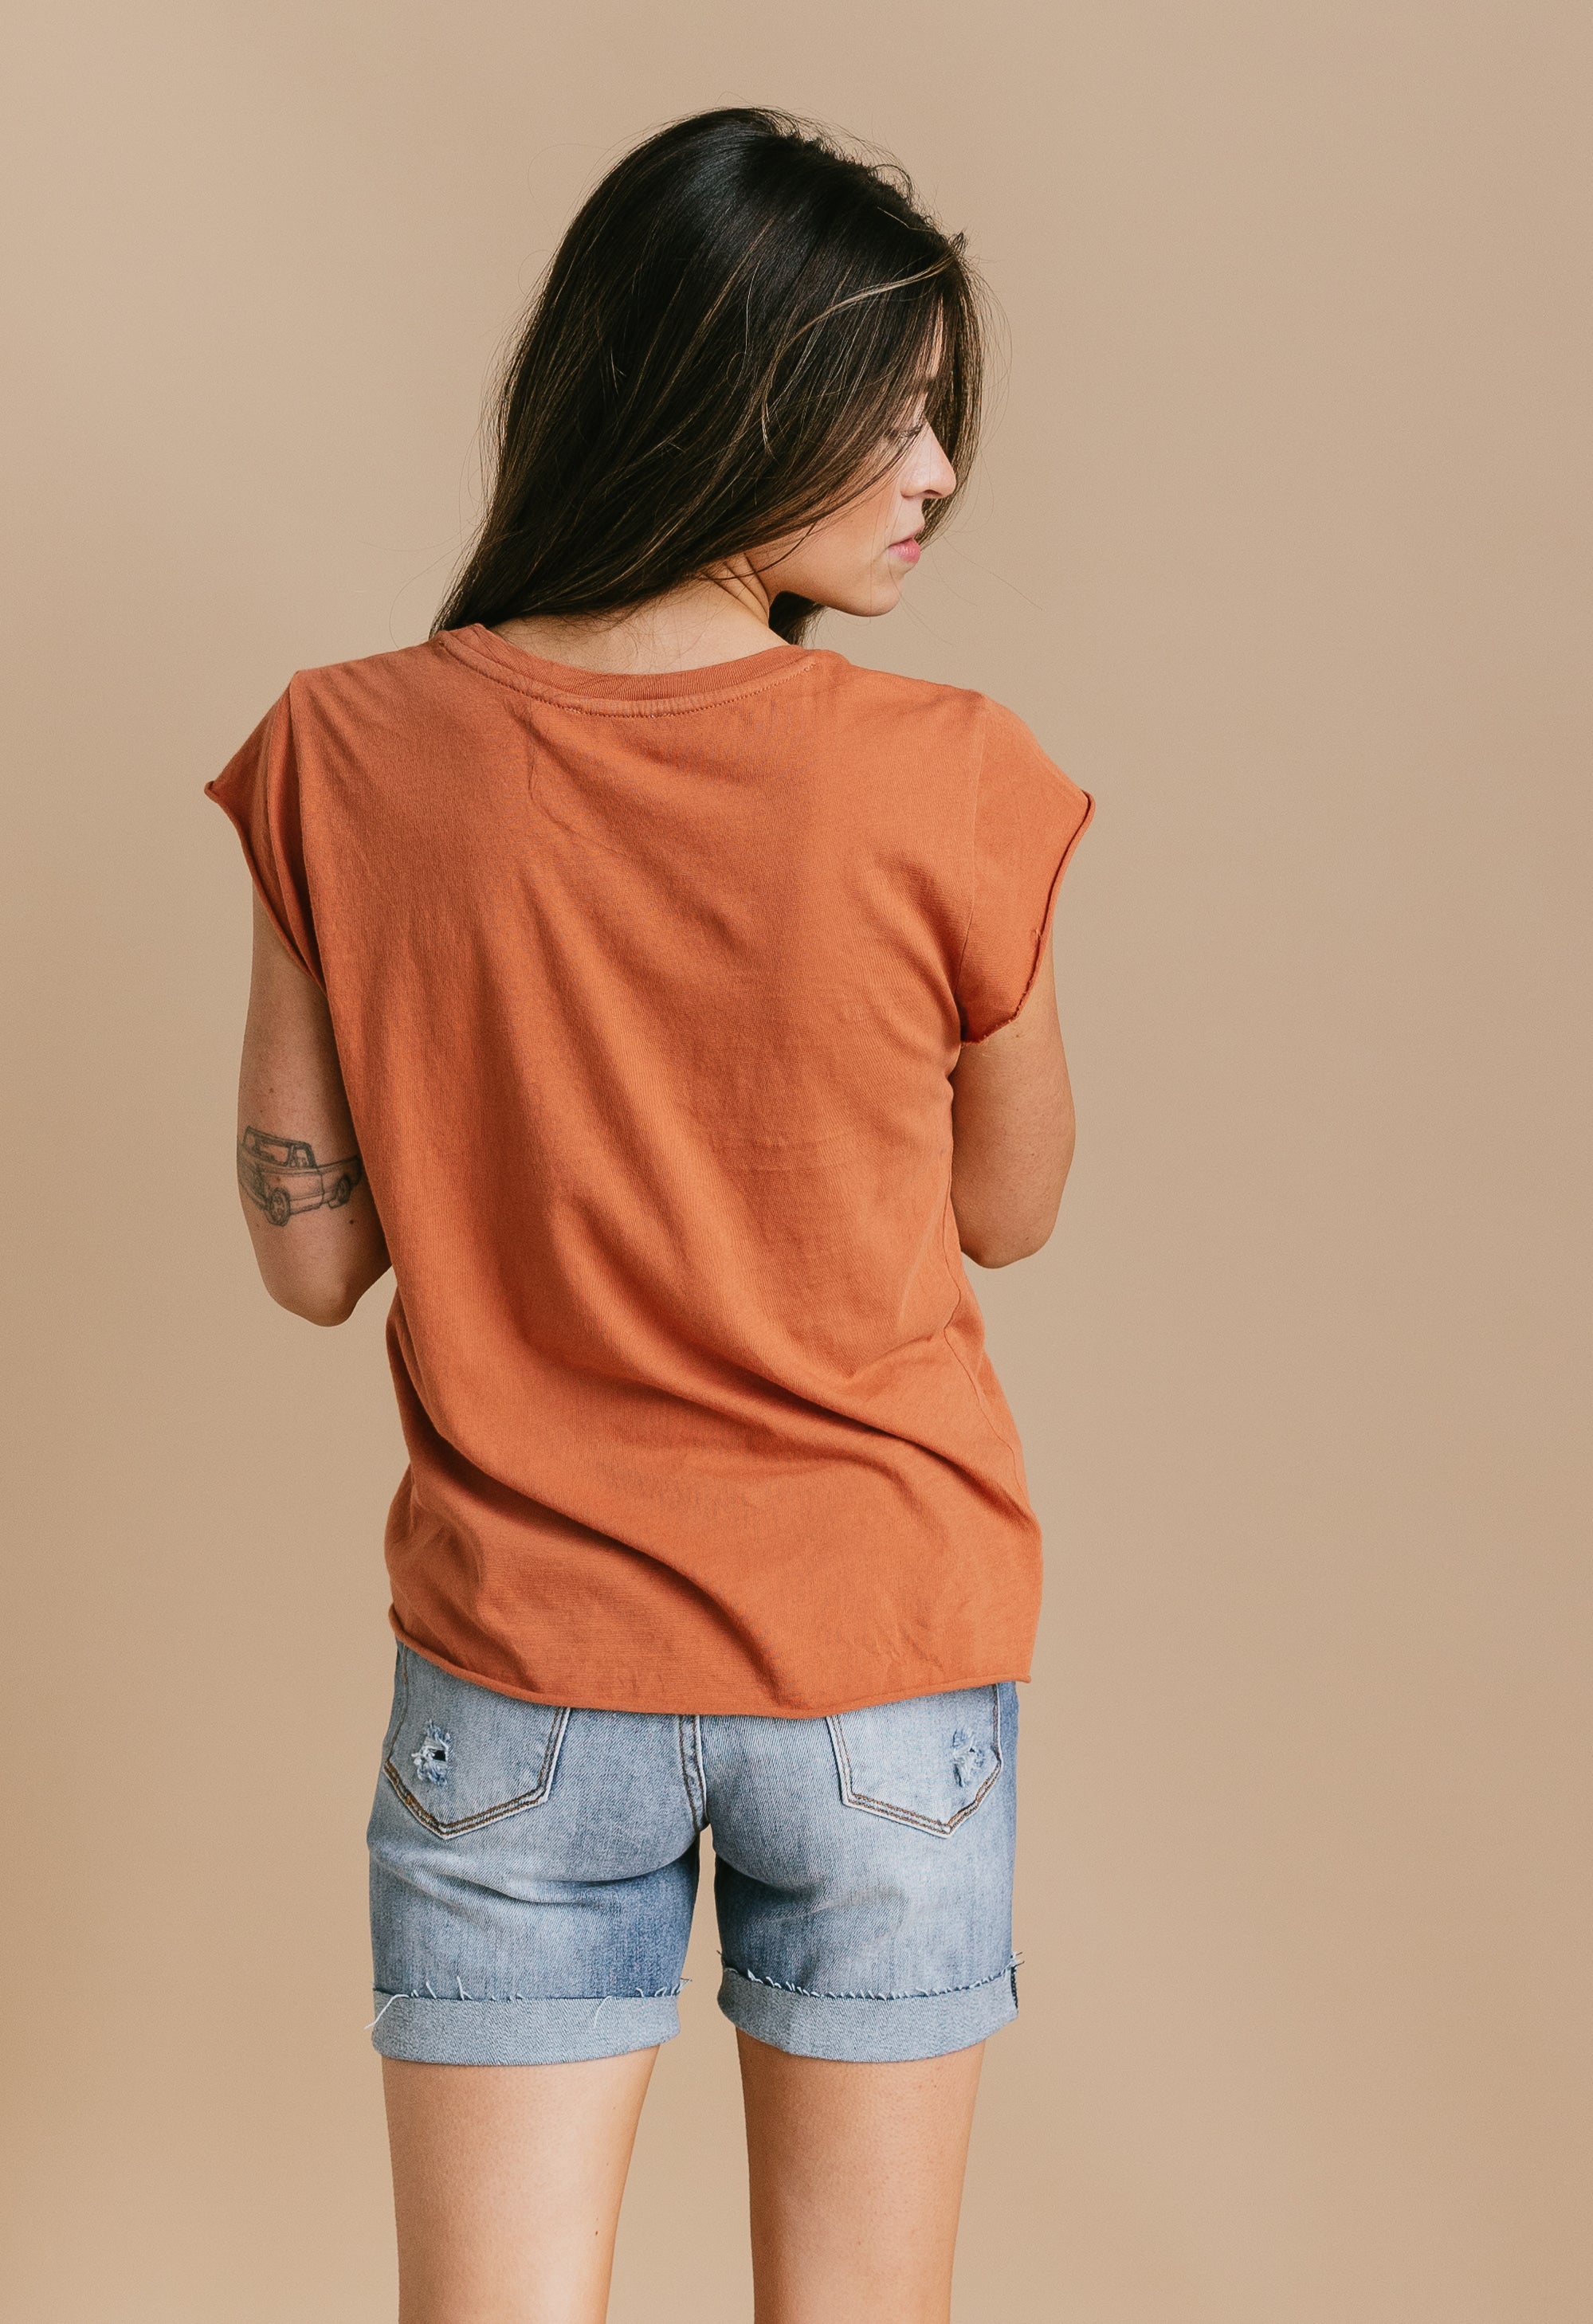 Dayton Tee - BAKED CLAY - willows clothing S/S Shirt